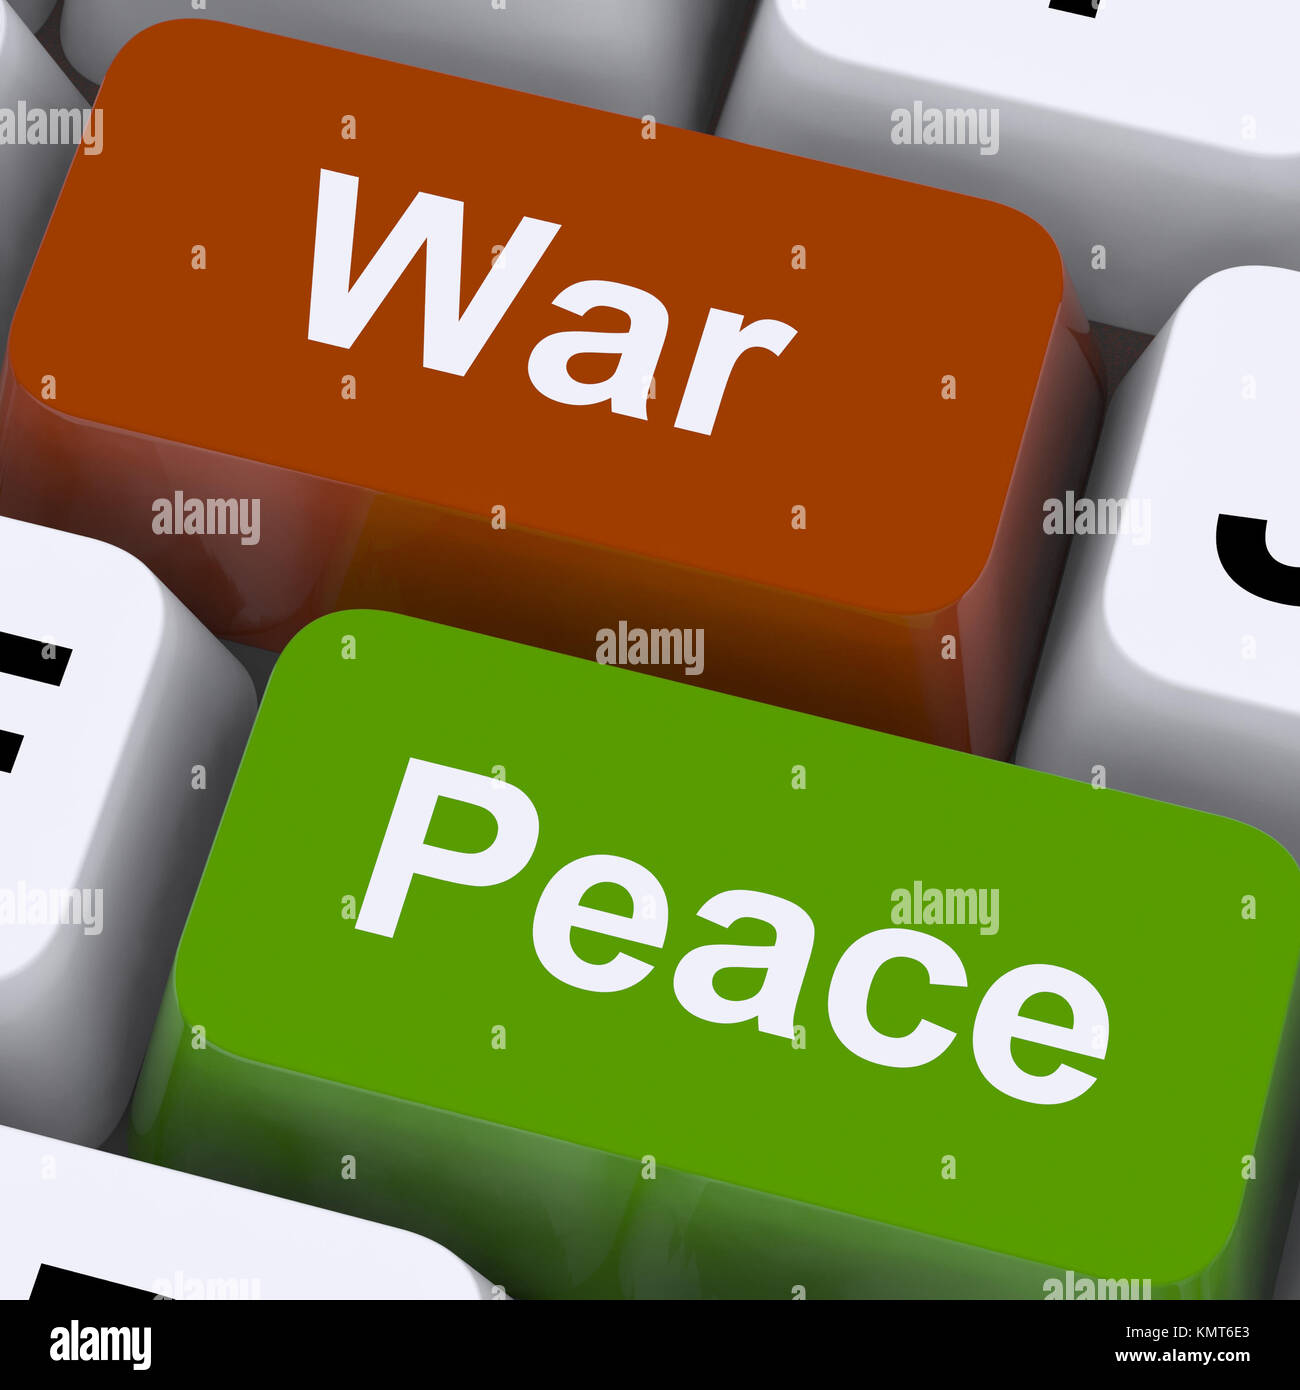 Peace War Keys Showing No Conflict Or Aggression Stock Photo